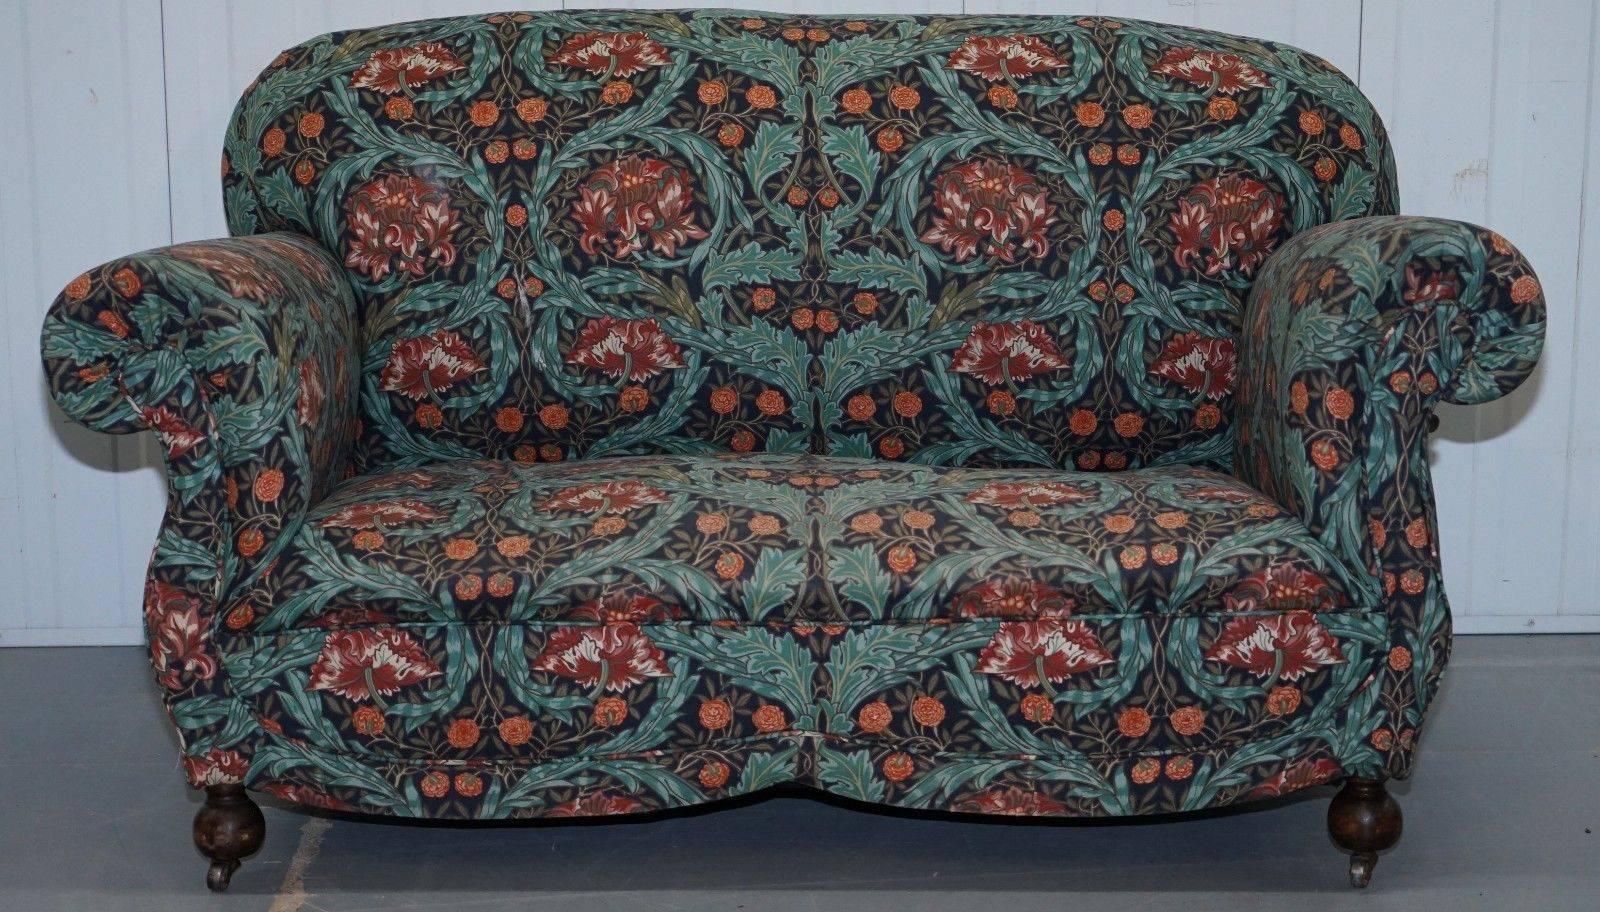 We are delighted to offer for sale this lovely William Morris upholstered Victorian drop arm sofa chaise part of a suite

I have included a picture of the pair of matching club armchairs, they are not included in this listing but are listed under